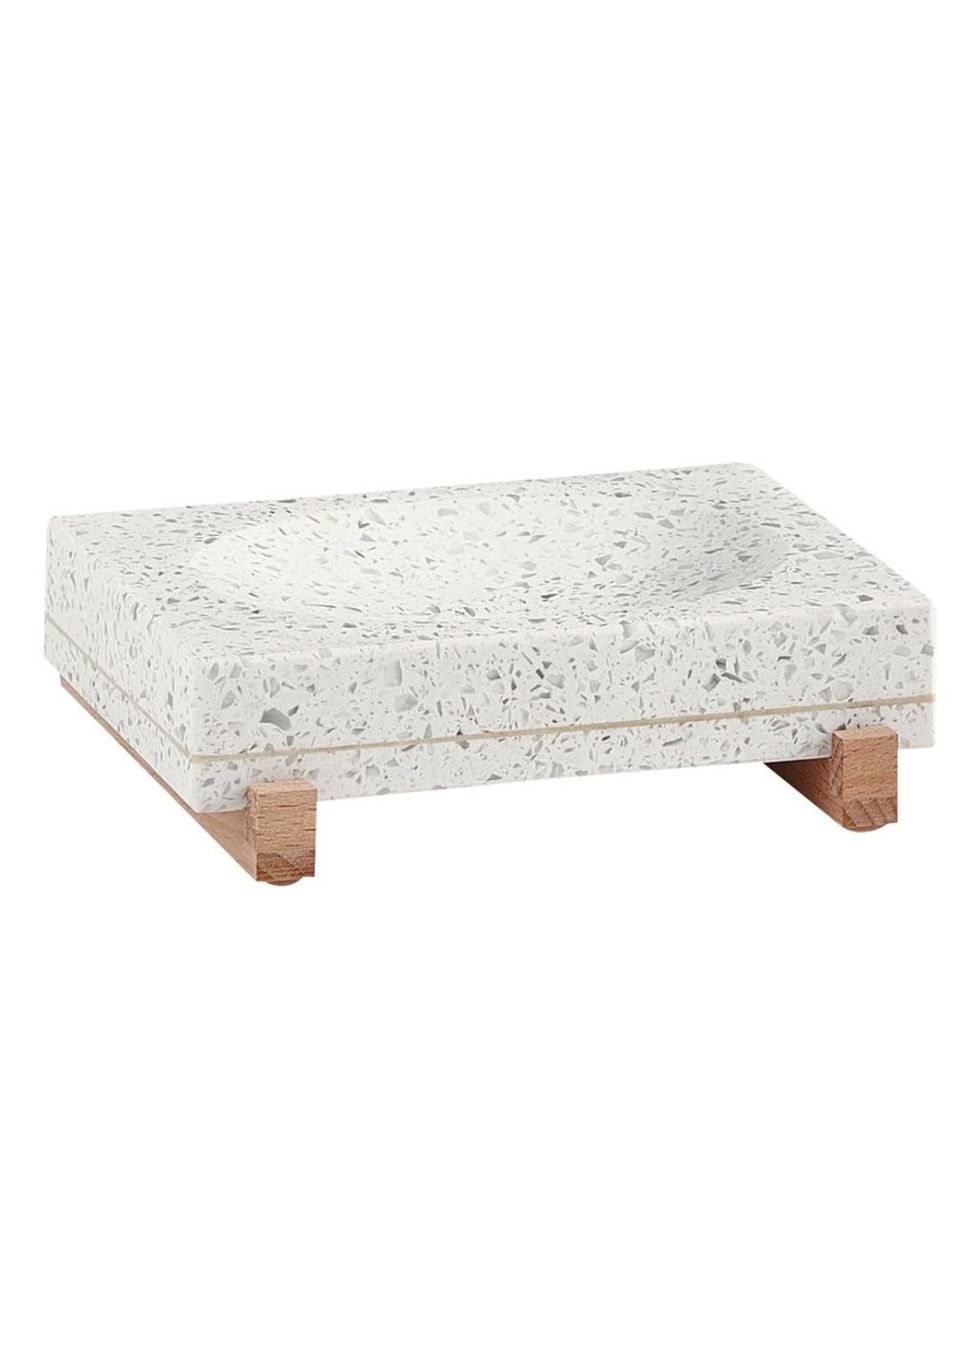 Furniture, Table, Coffee table, Beige, Rectangle, Bench, Stool, Rock, Marble, 